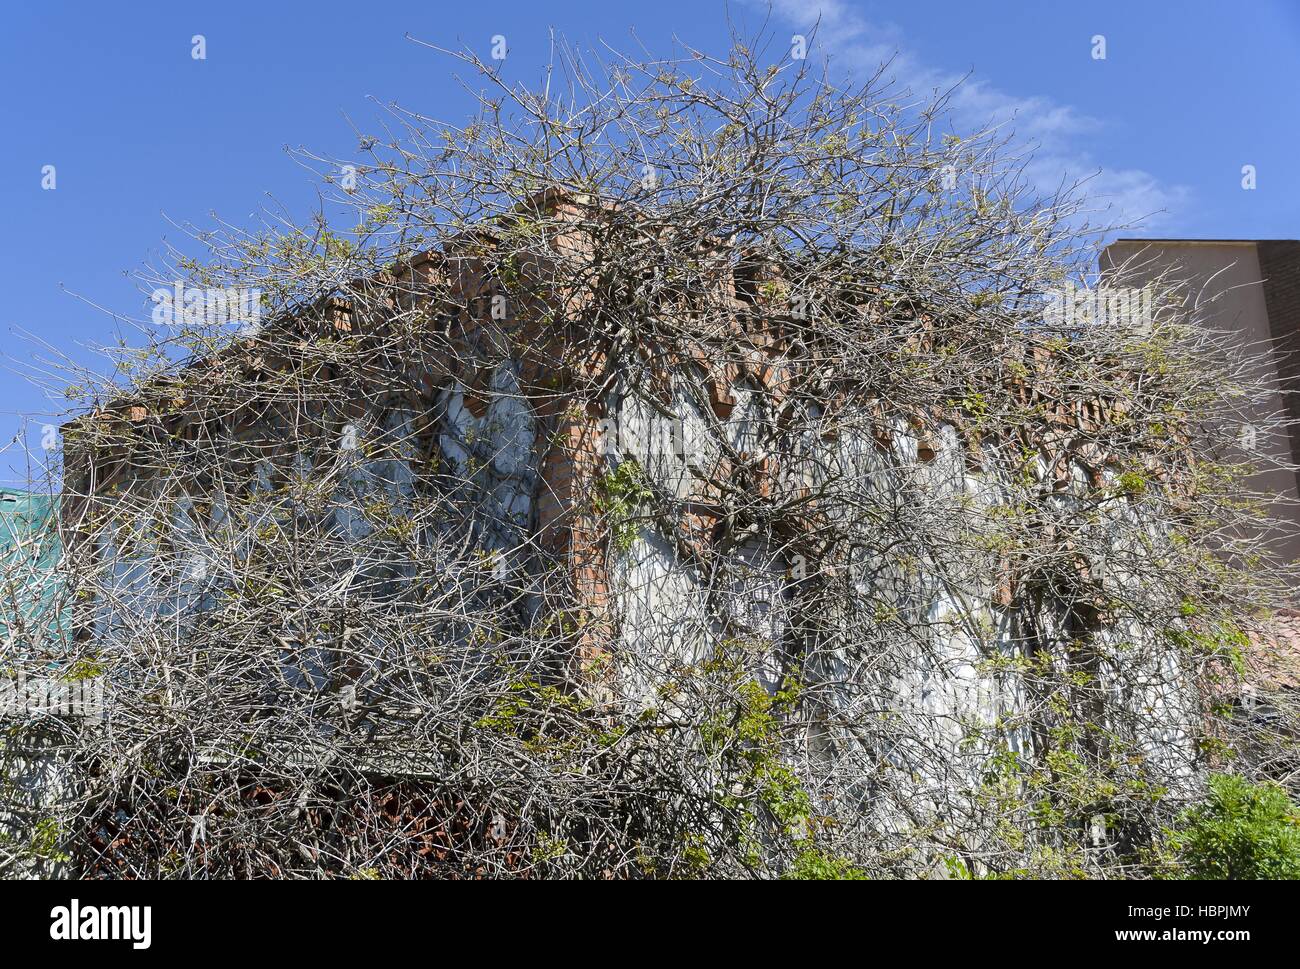 house overgrown by shrubs Stock Photo